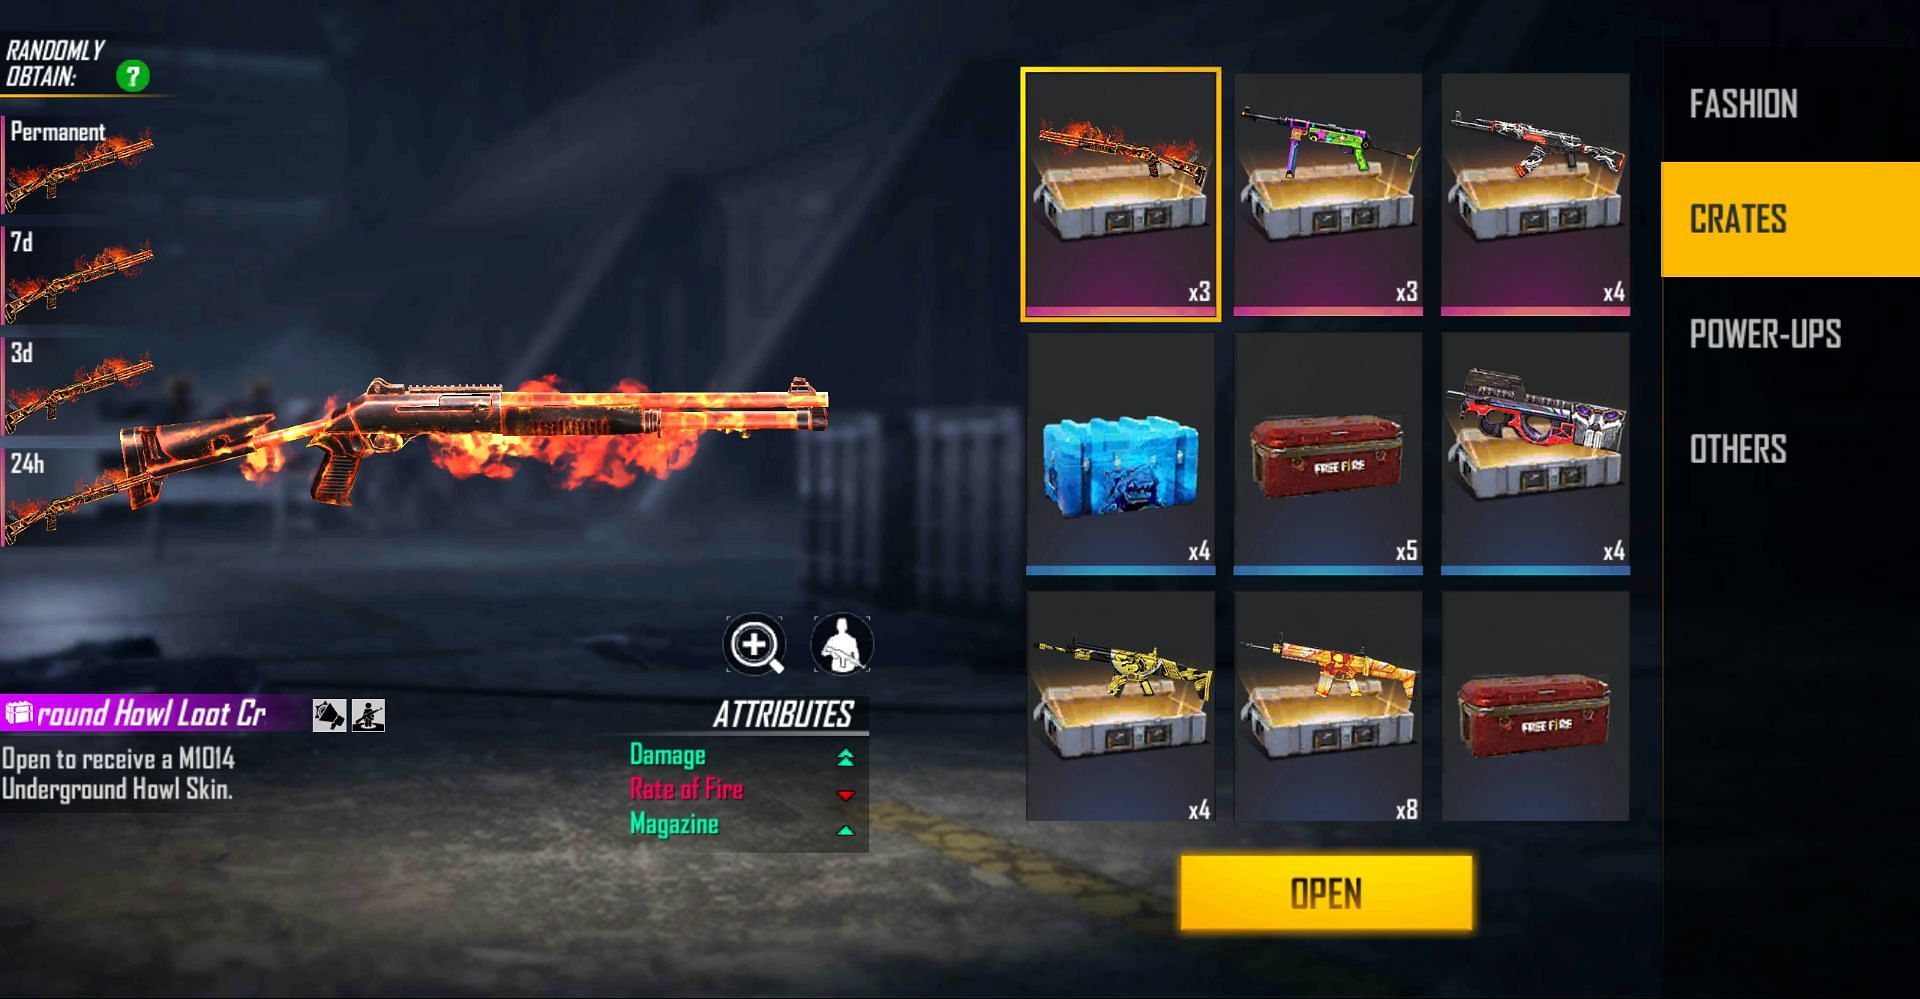 M1014 Underground Howl Loot Crate (Image via Free FIre)